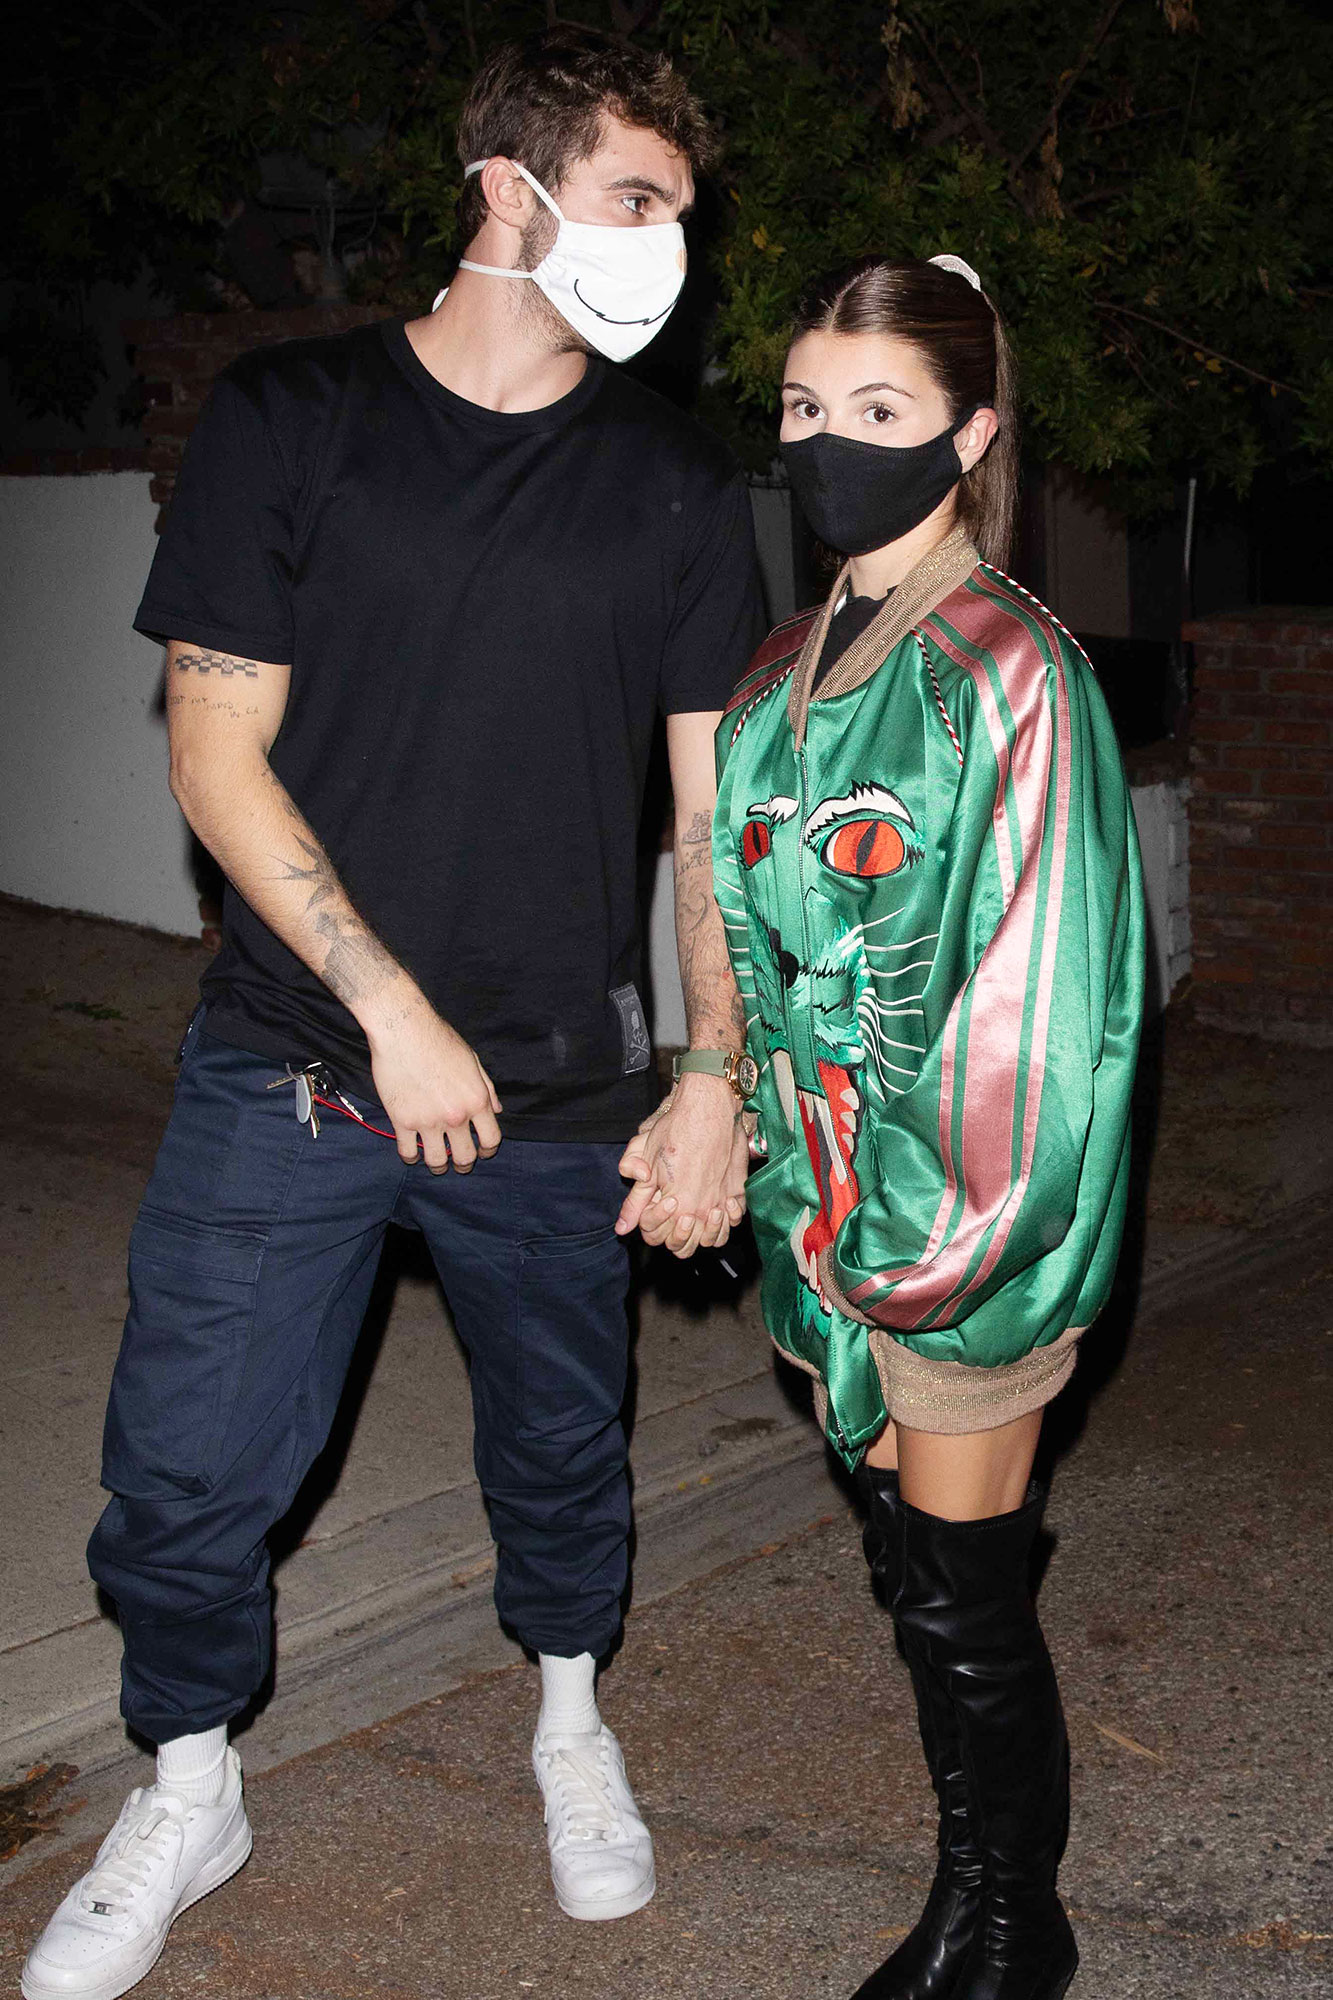 Olivia Jade Giannulli Gets Silly During Night Out With Boyfriend Jackson Guthy Before Mom Lori Loughlin Prison Sentence